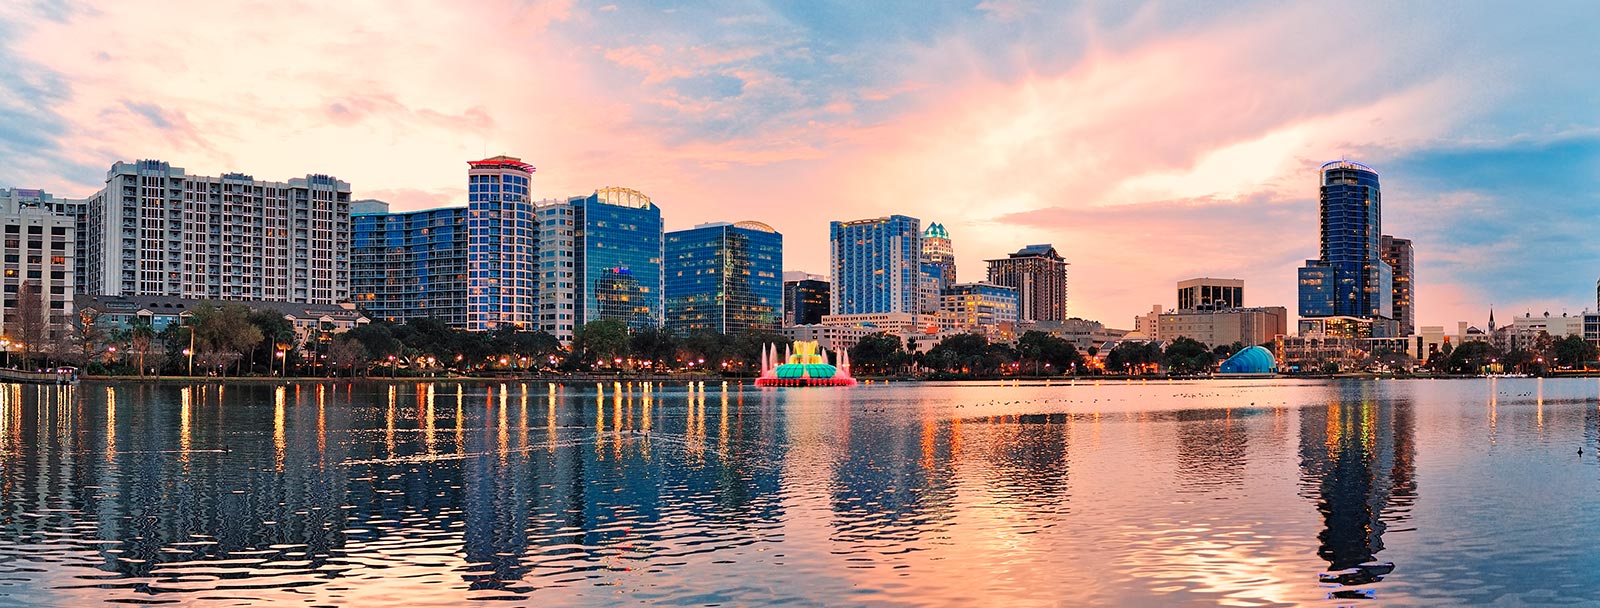 Find things to do in Orlando!